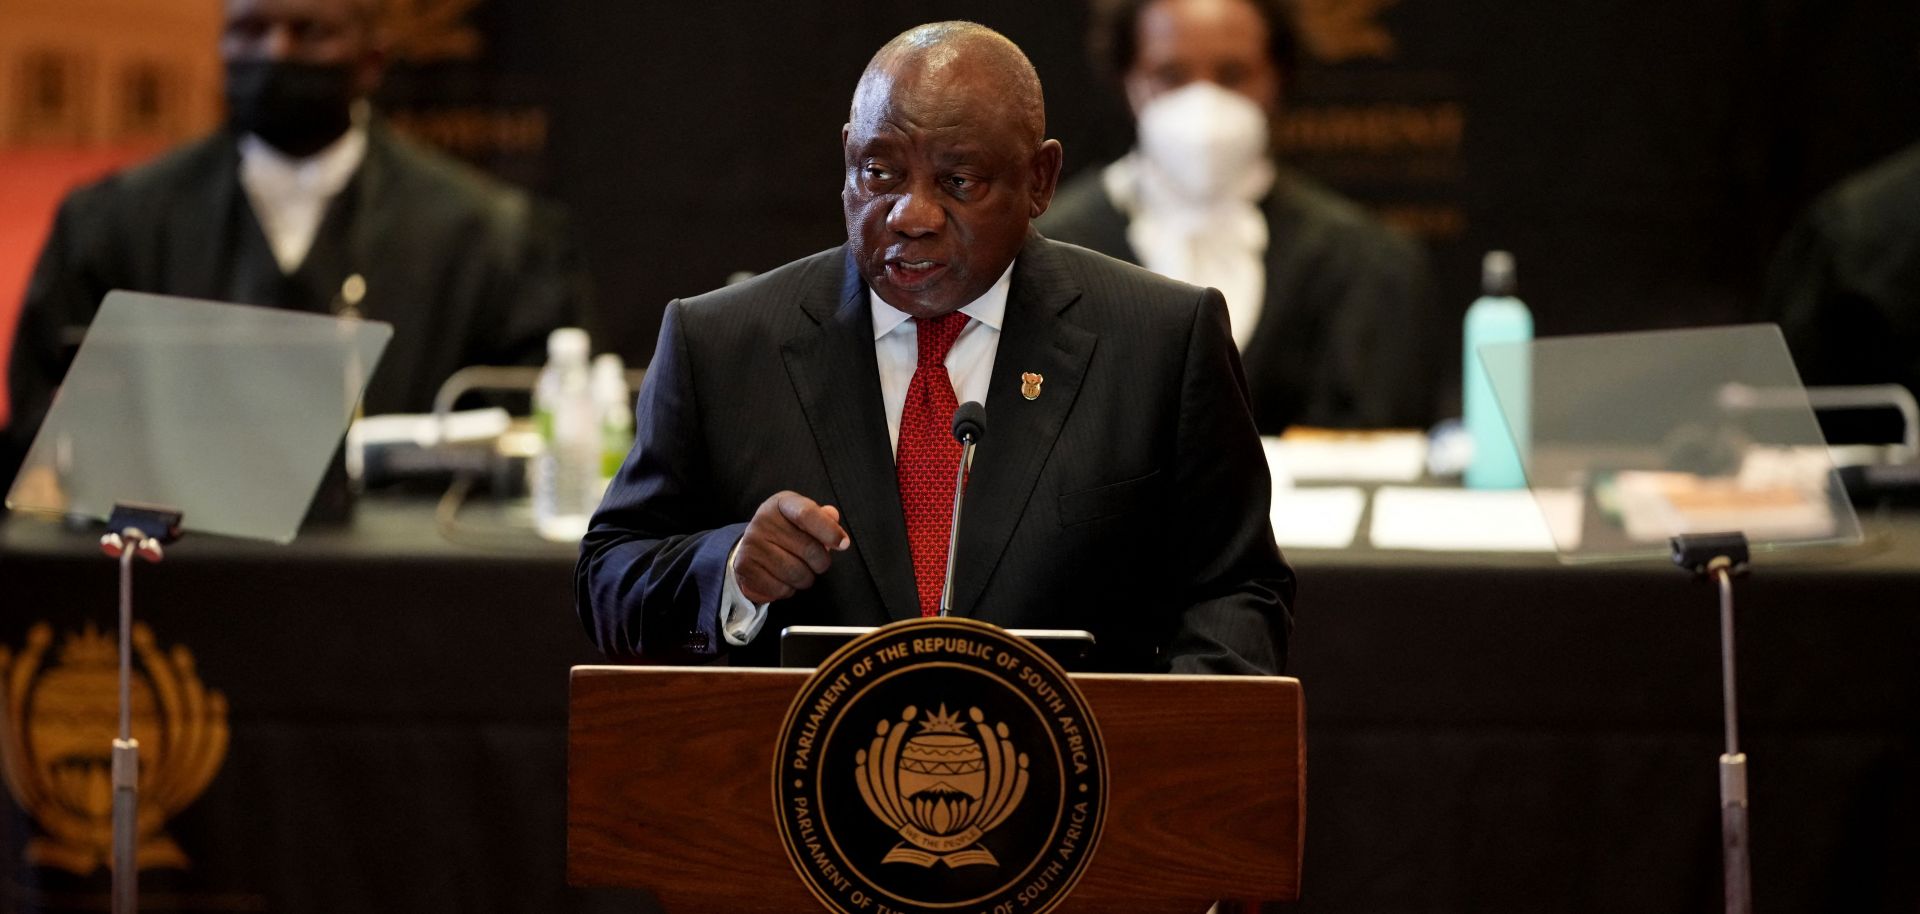 South African President Cyril Ramaphosa delivers his State of the Nation address in Cape Town, South Africa, on Feb. 10, 2022.